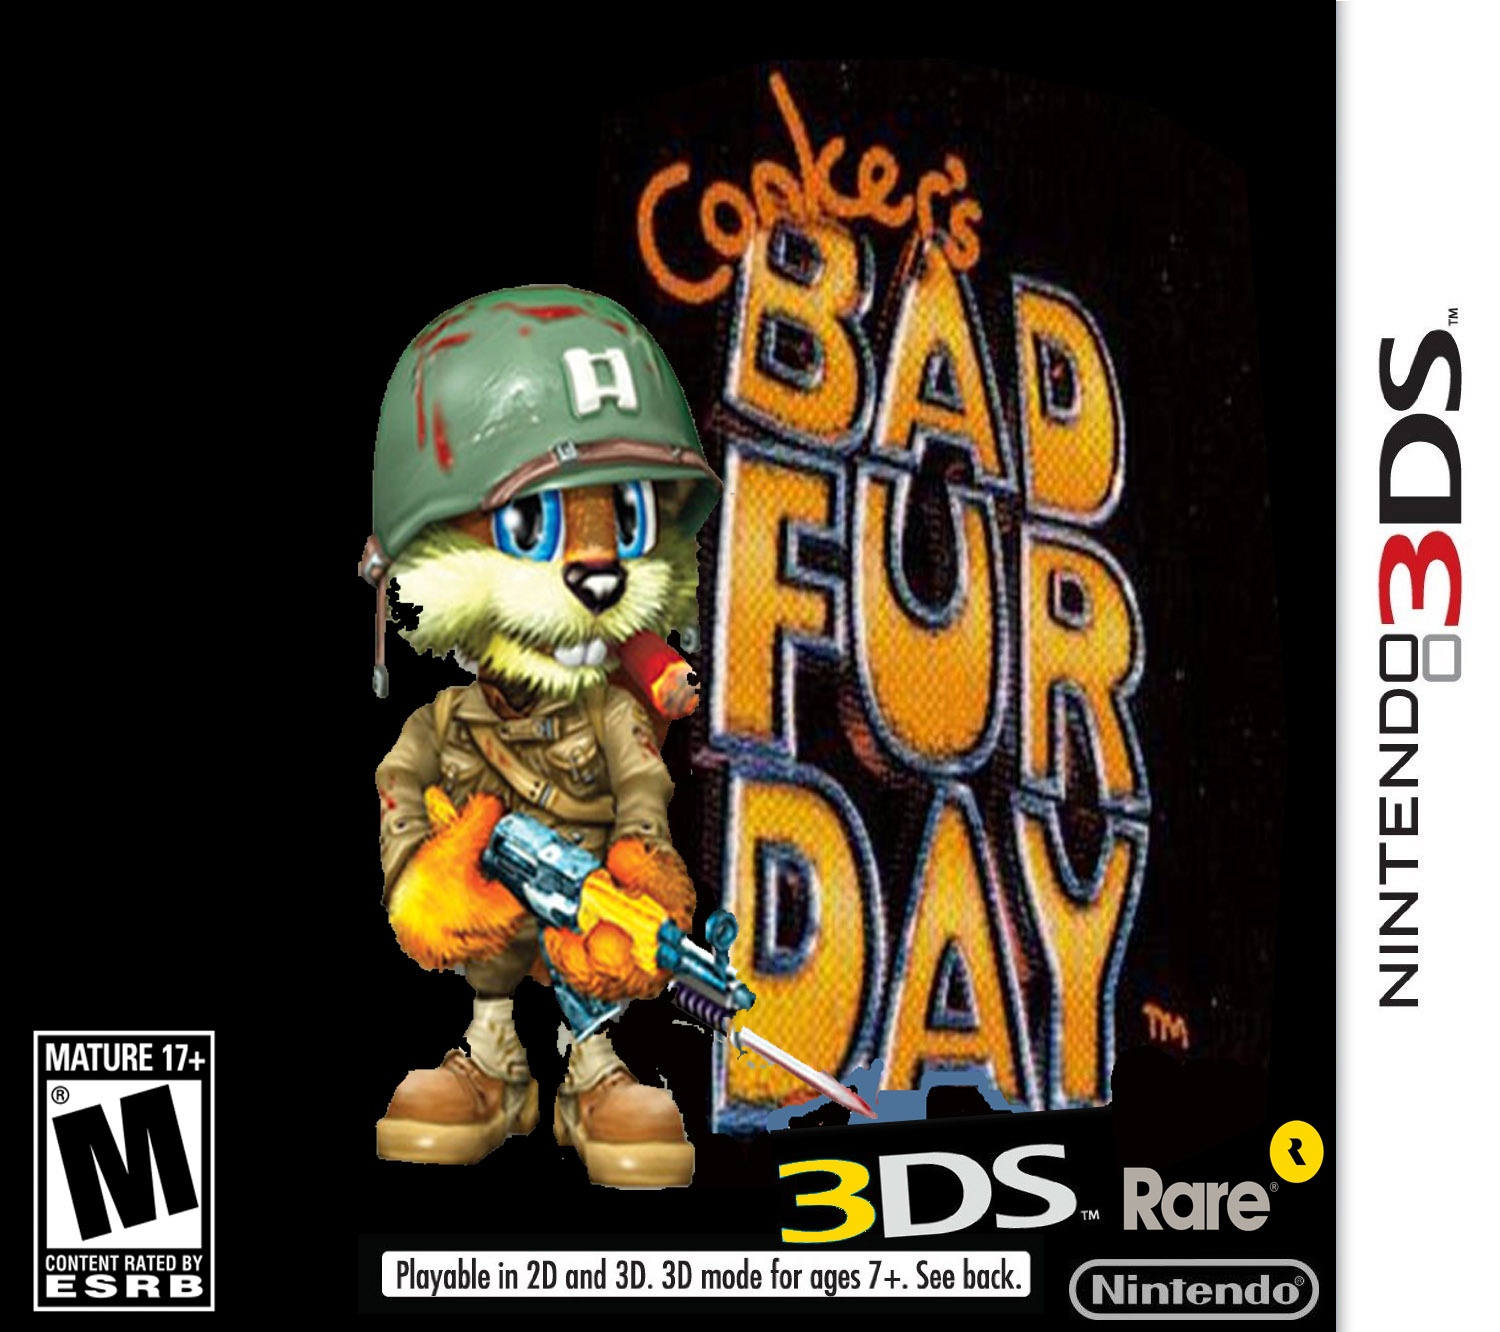 Conker's Bad Fur Day 3DS box cover